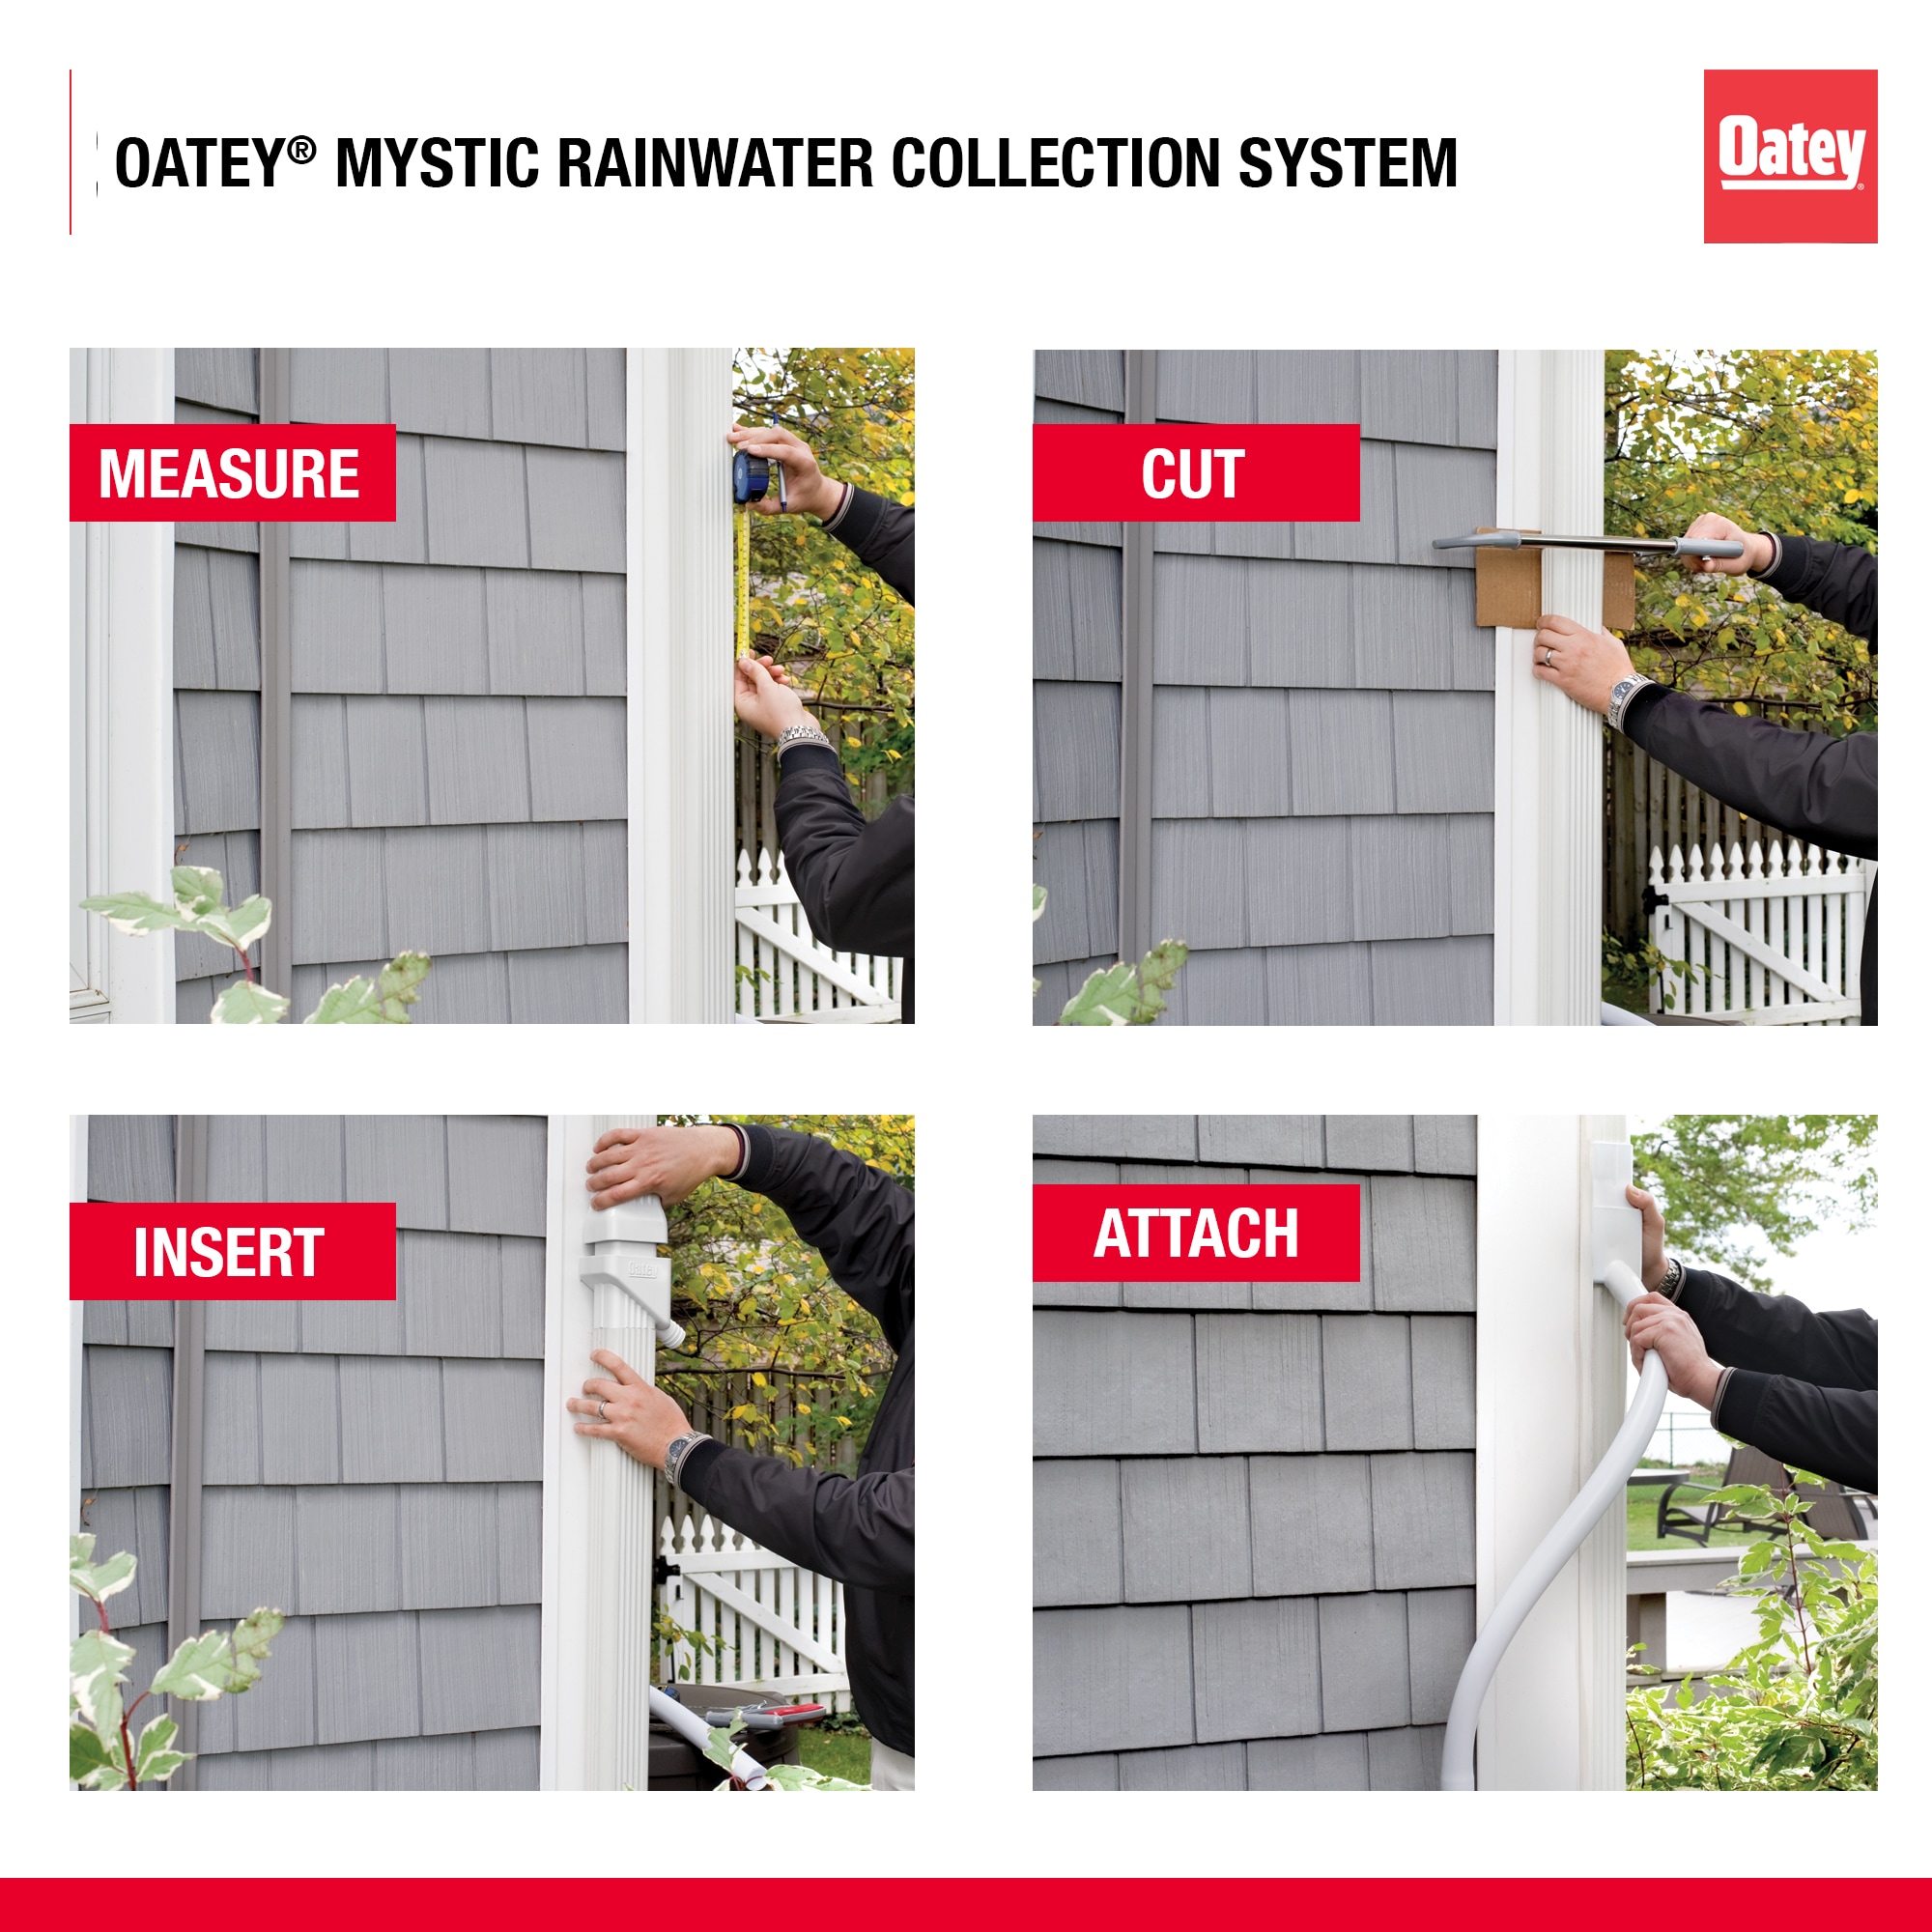 Oatey Mystic Rainwater Collection System Fits 2" X 3" Residential Downspouts